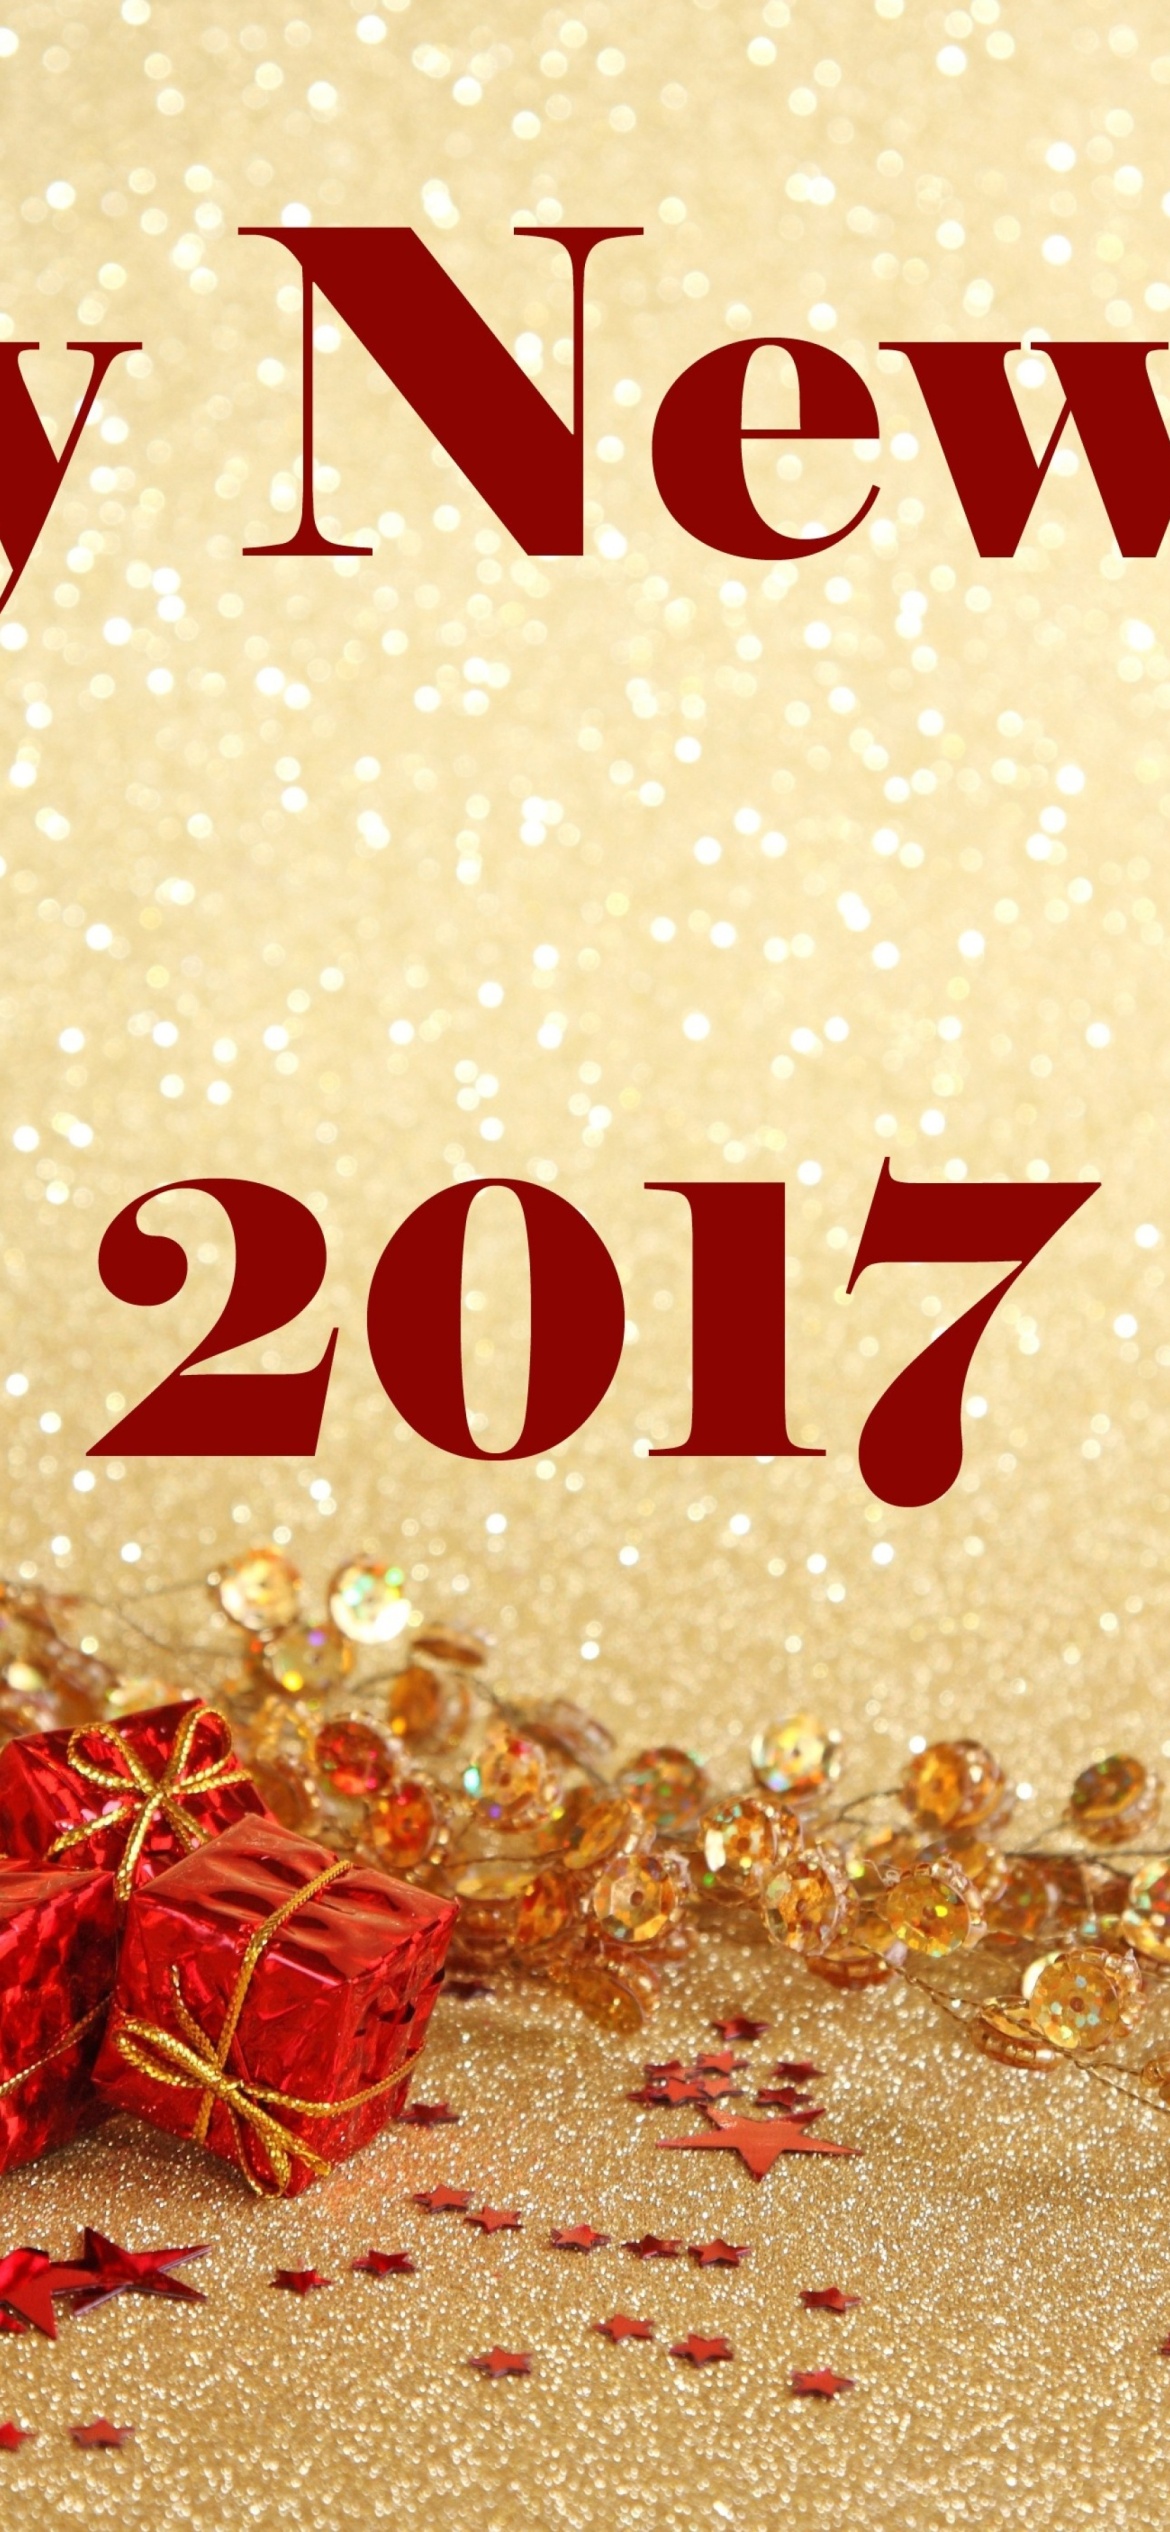 Happy New Year 2017 with Gifts screenshot #1 1170x2532